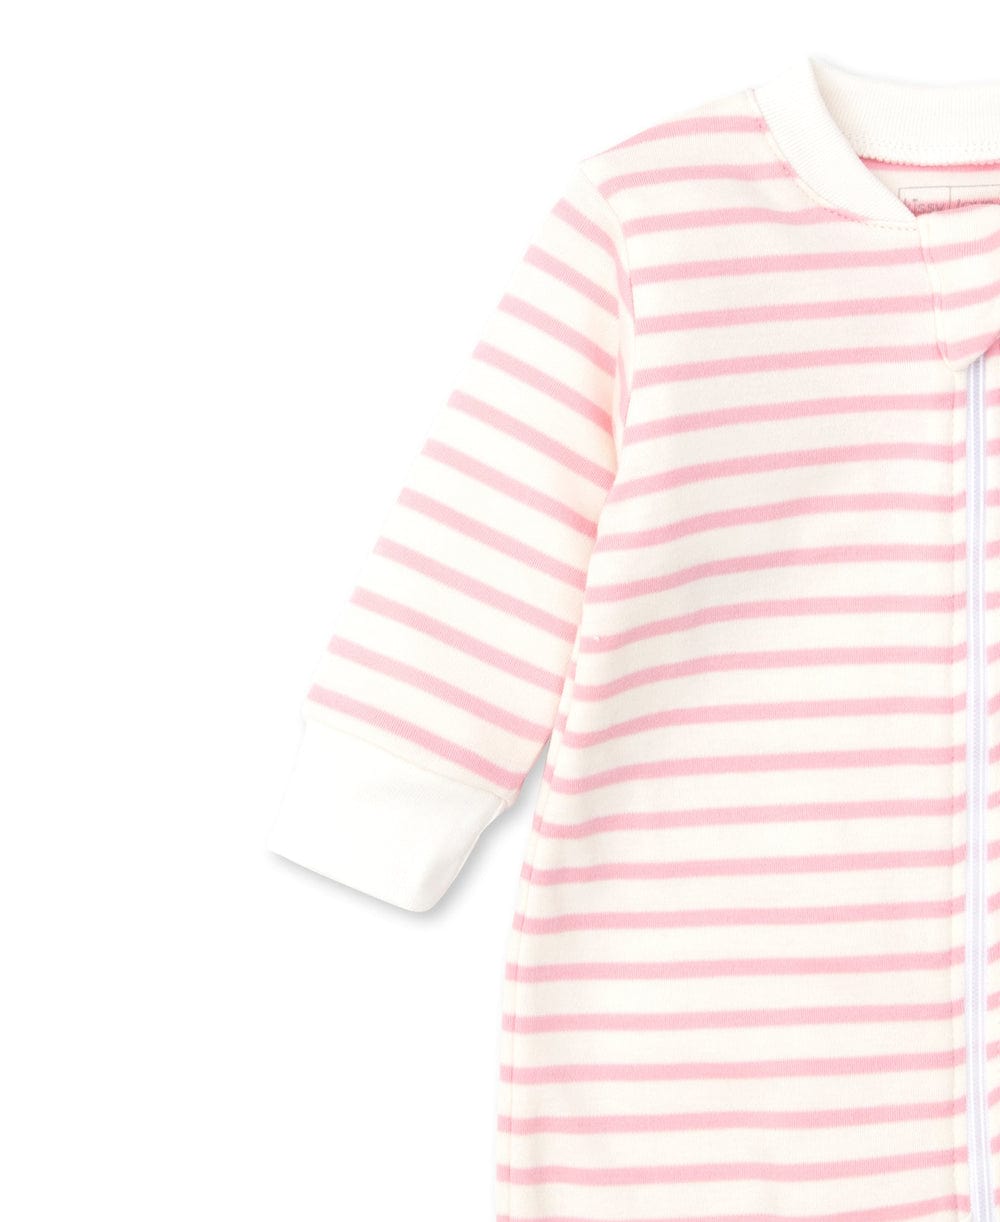 Kissy Kissy Kissy Kissy Footie with Zip Basic Stripes - Little Miss Muffin Children & Home